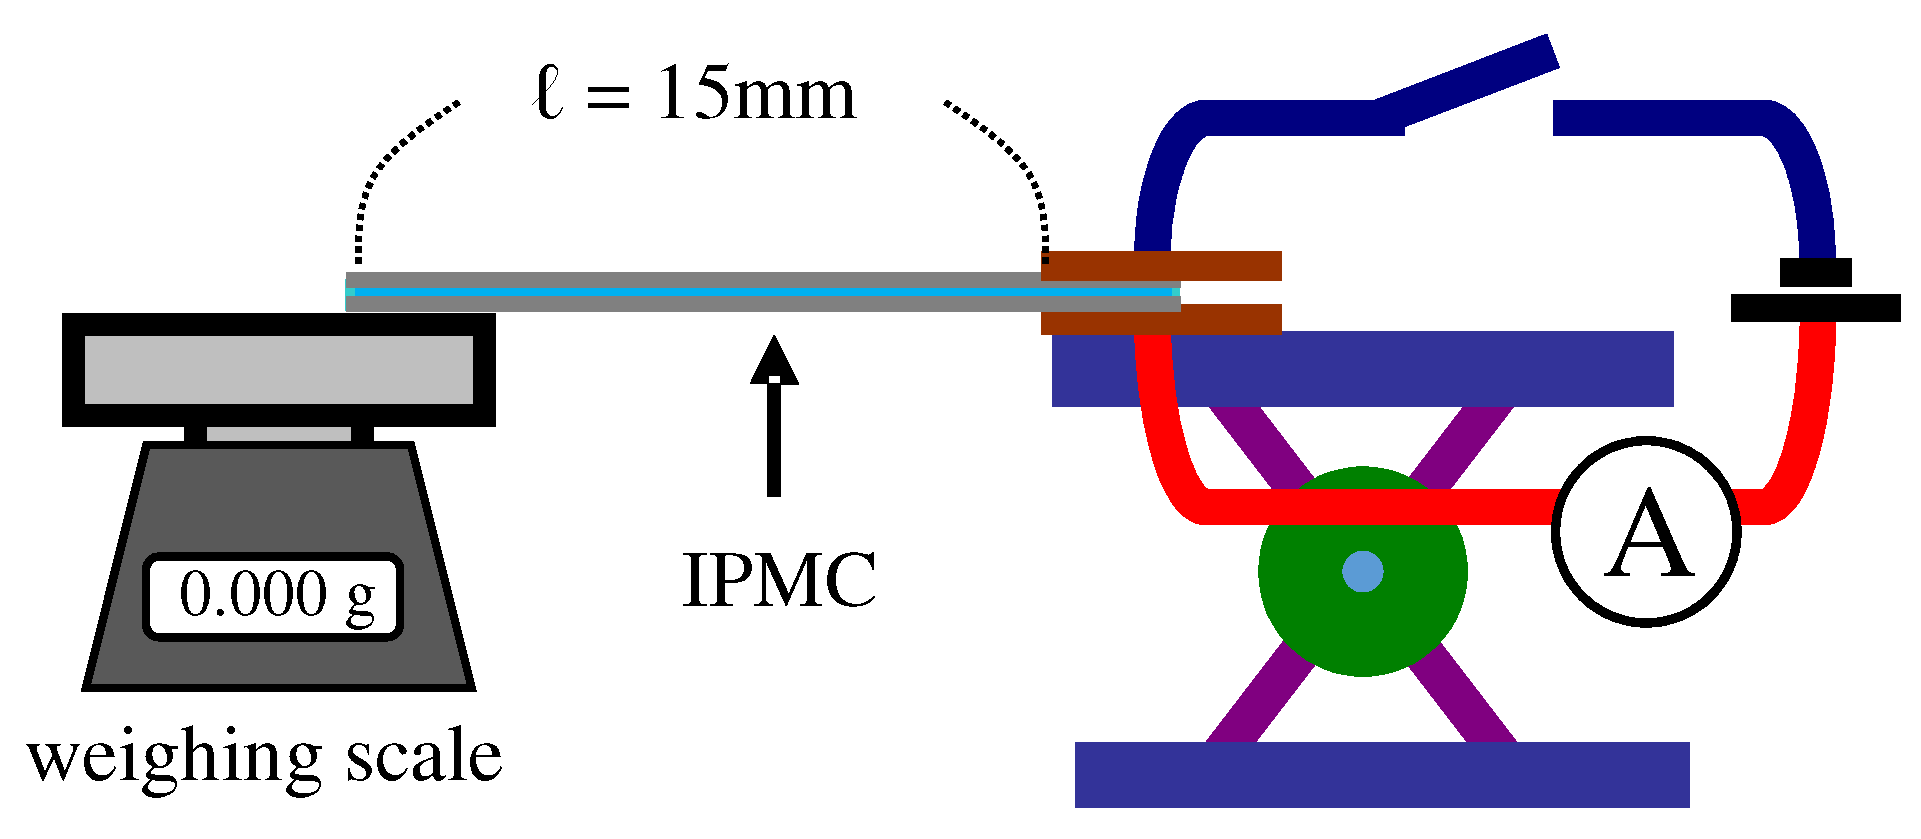 Photograph of the Fabricated IPMC.